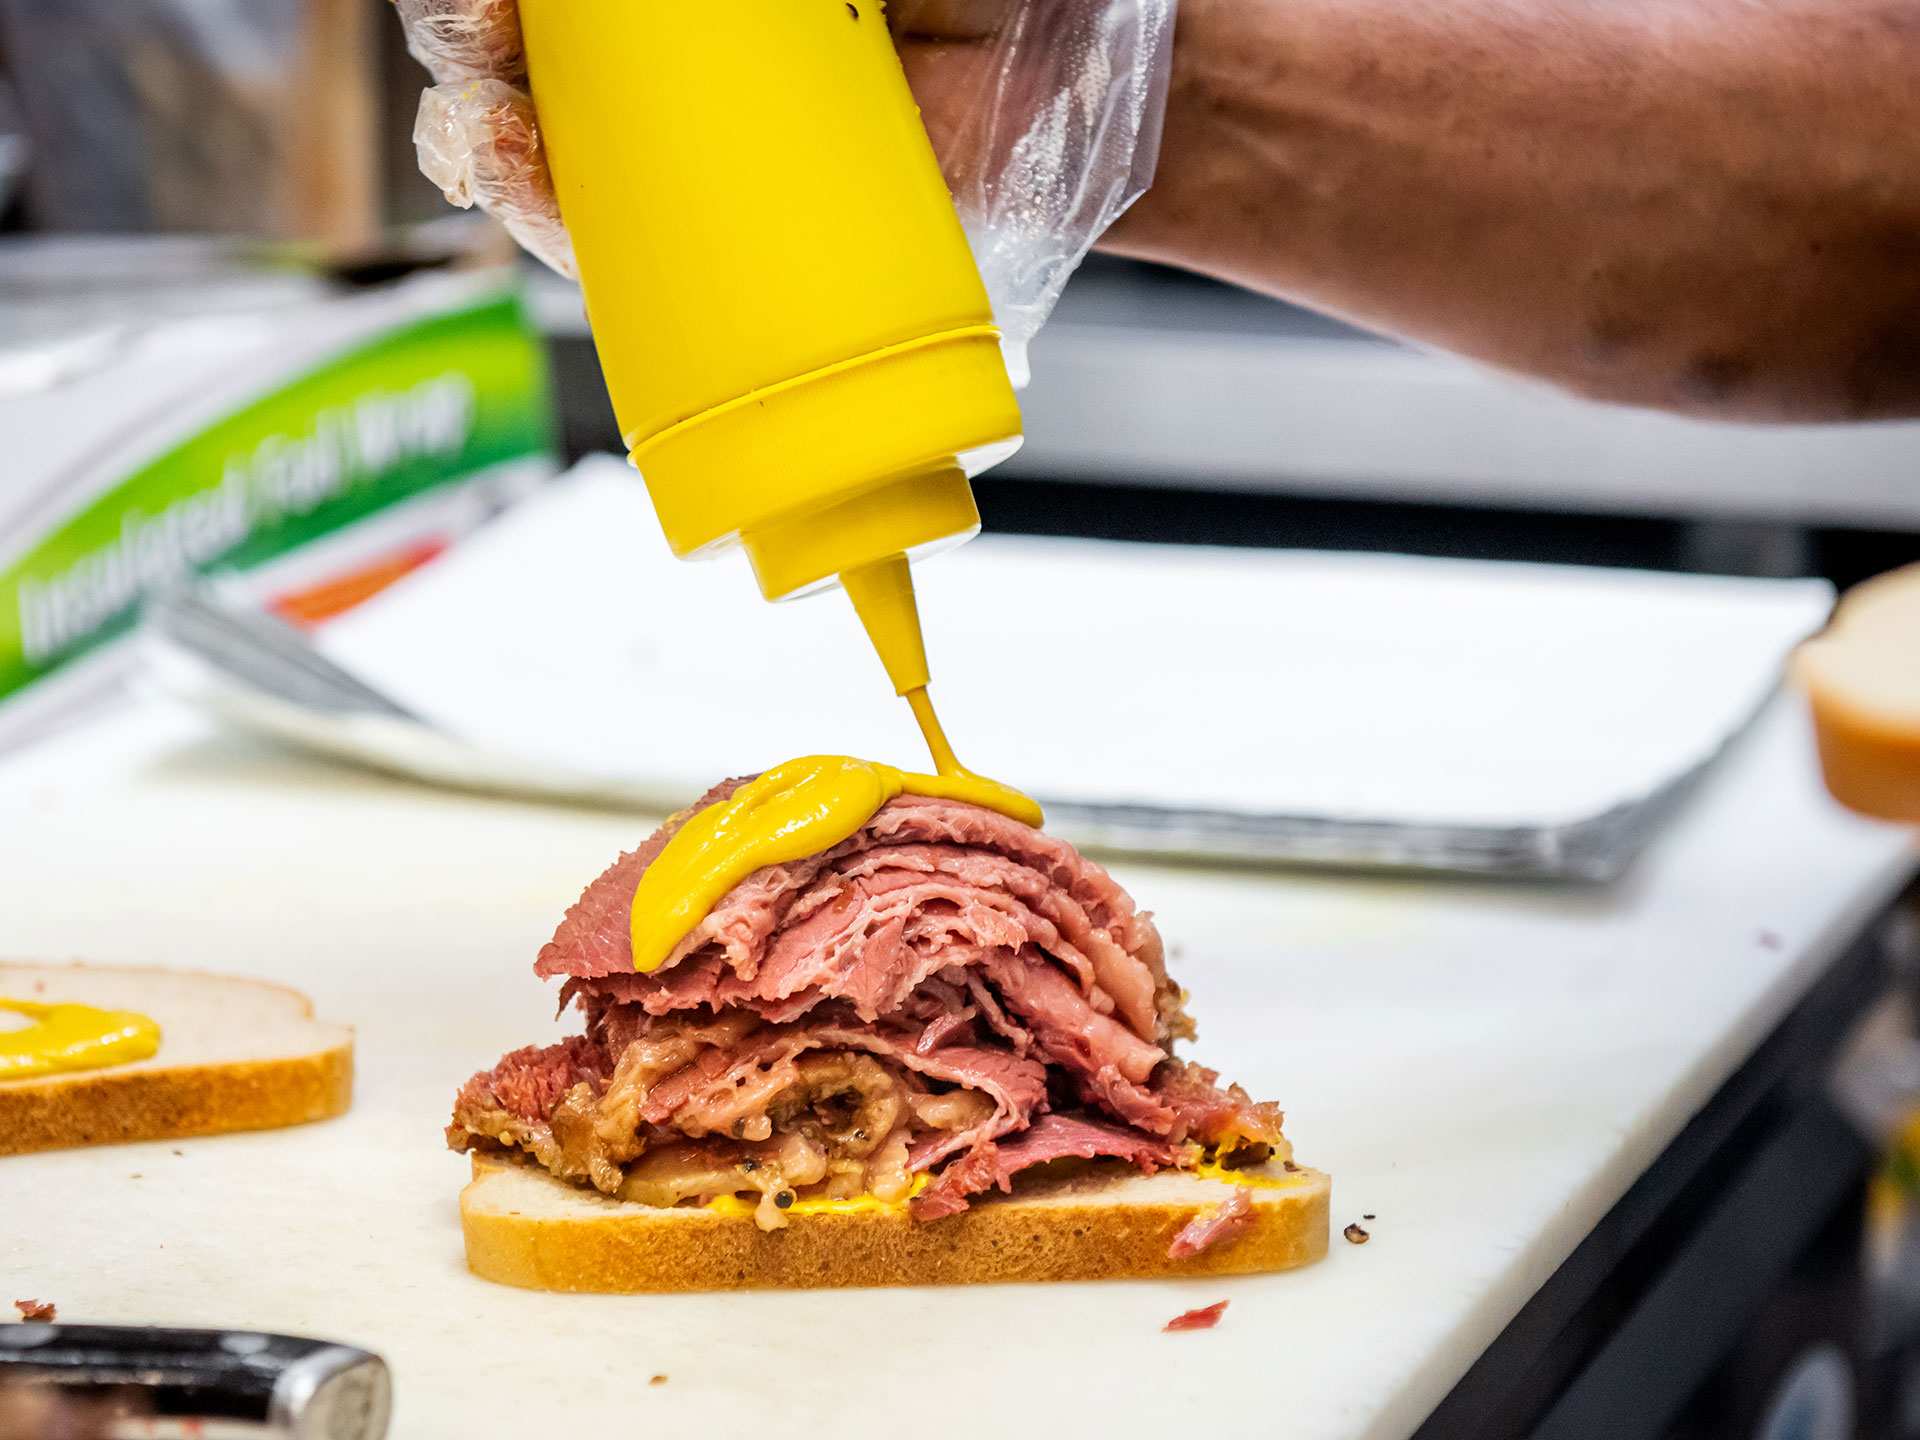 Best Scarborough restaurants | Making a sandwich at SumiLicious Smoked Meat & Deli